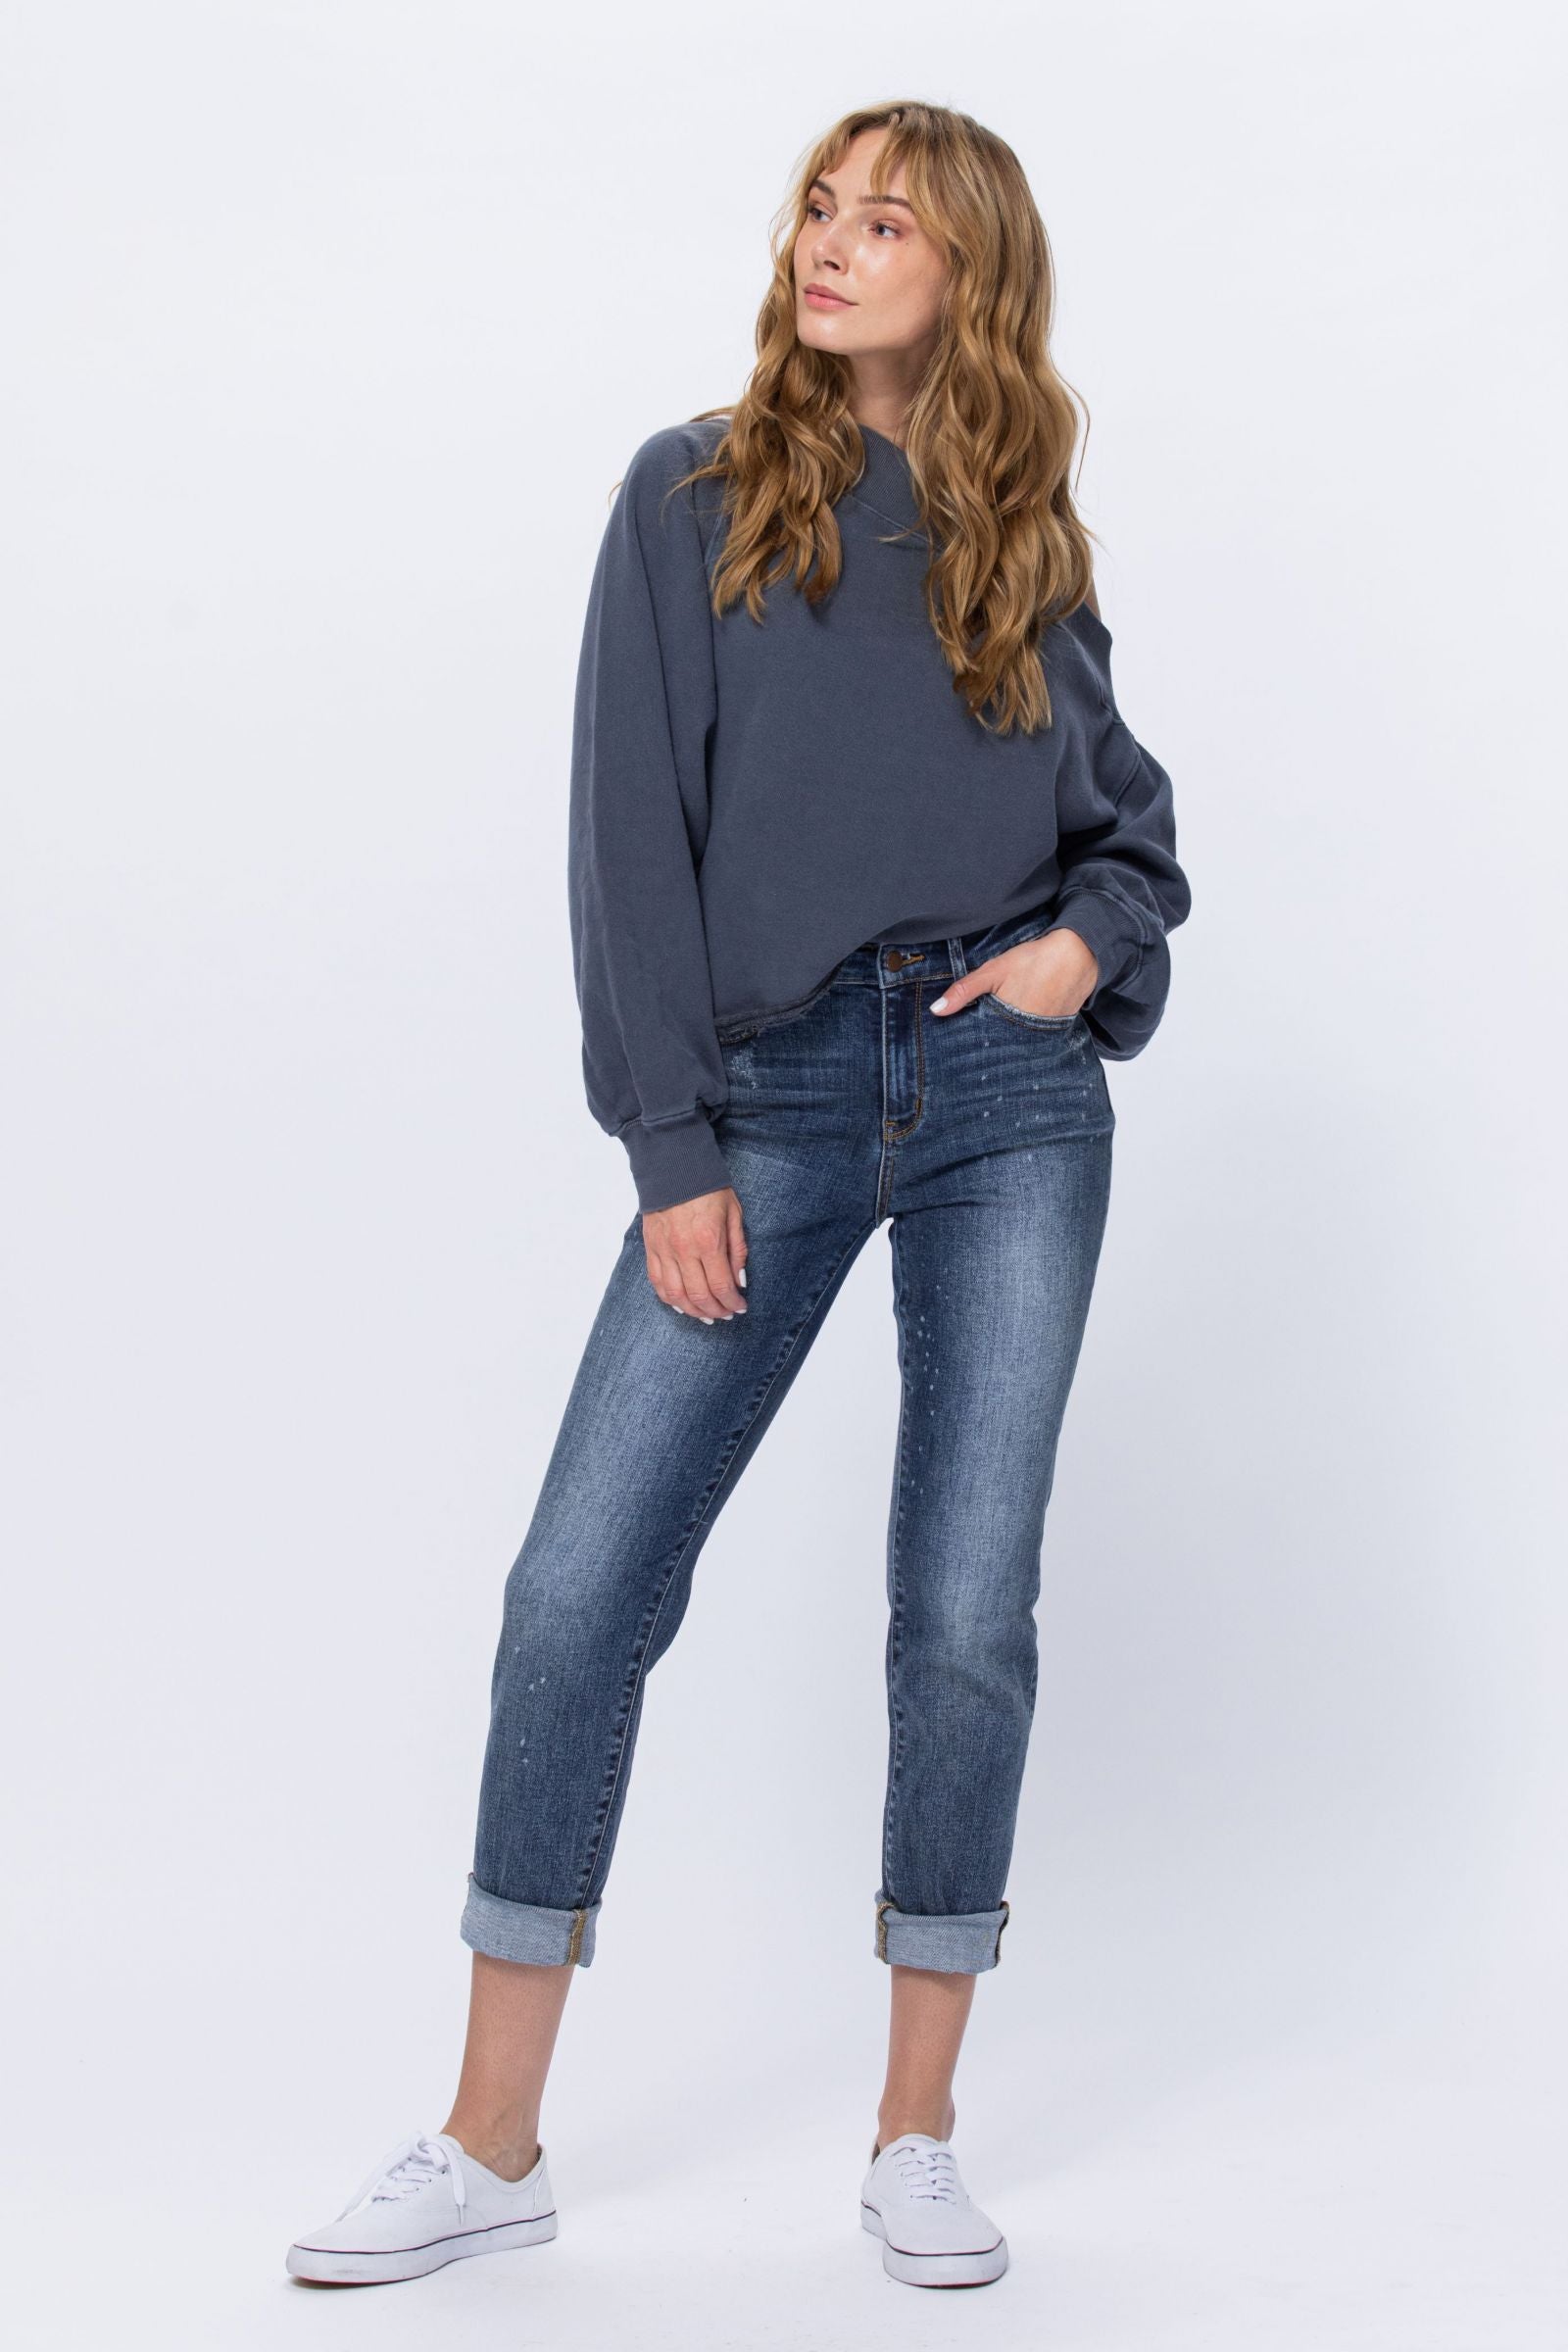 Judy Blue Jeans at Oak&Pearl: Exclusive Styles for Your Perfect Fit